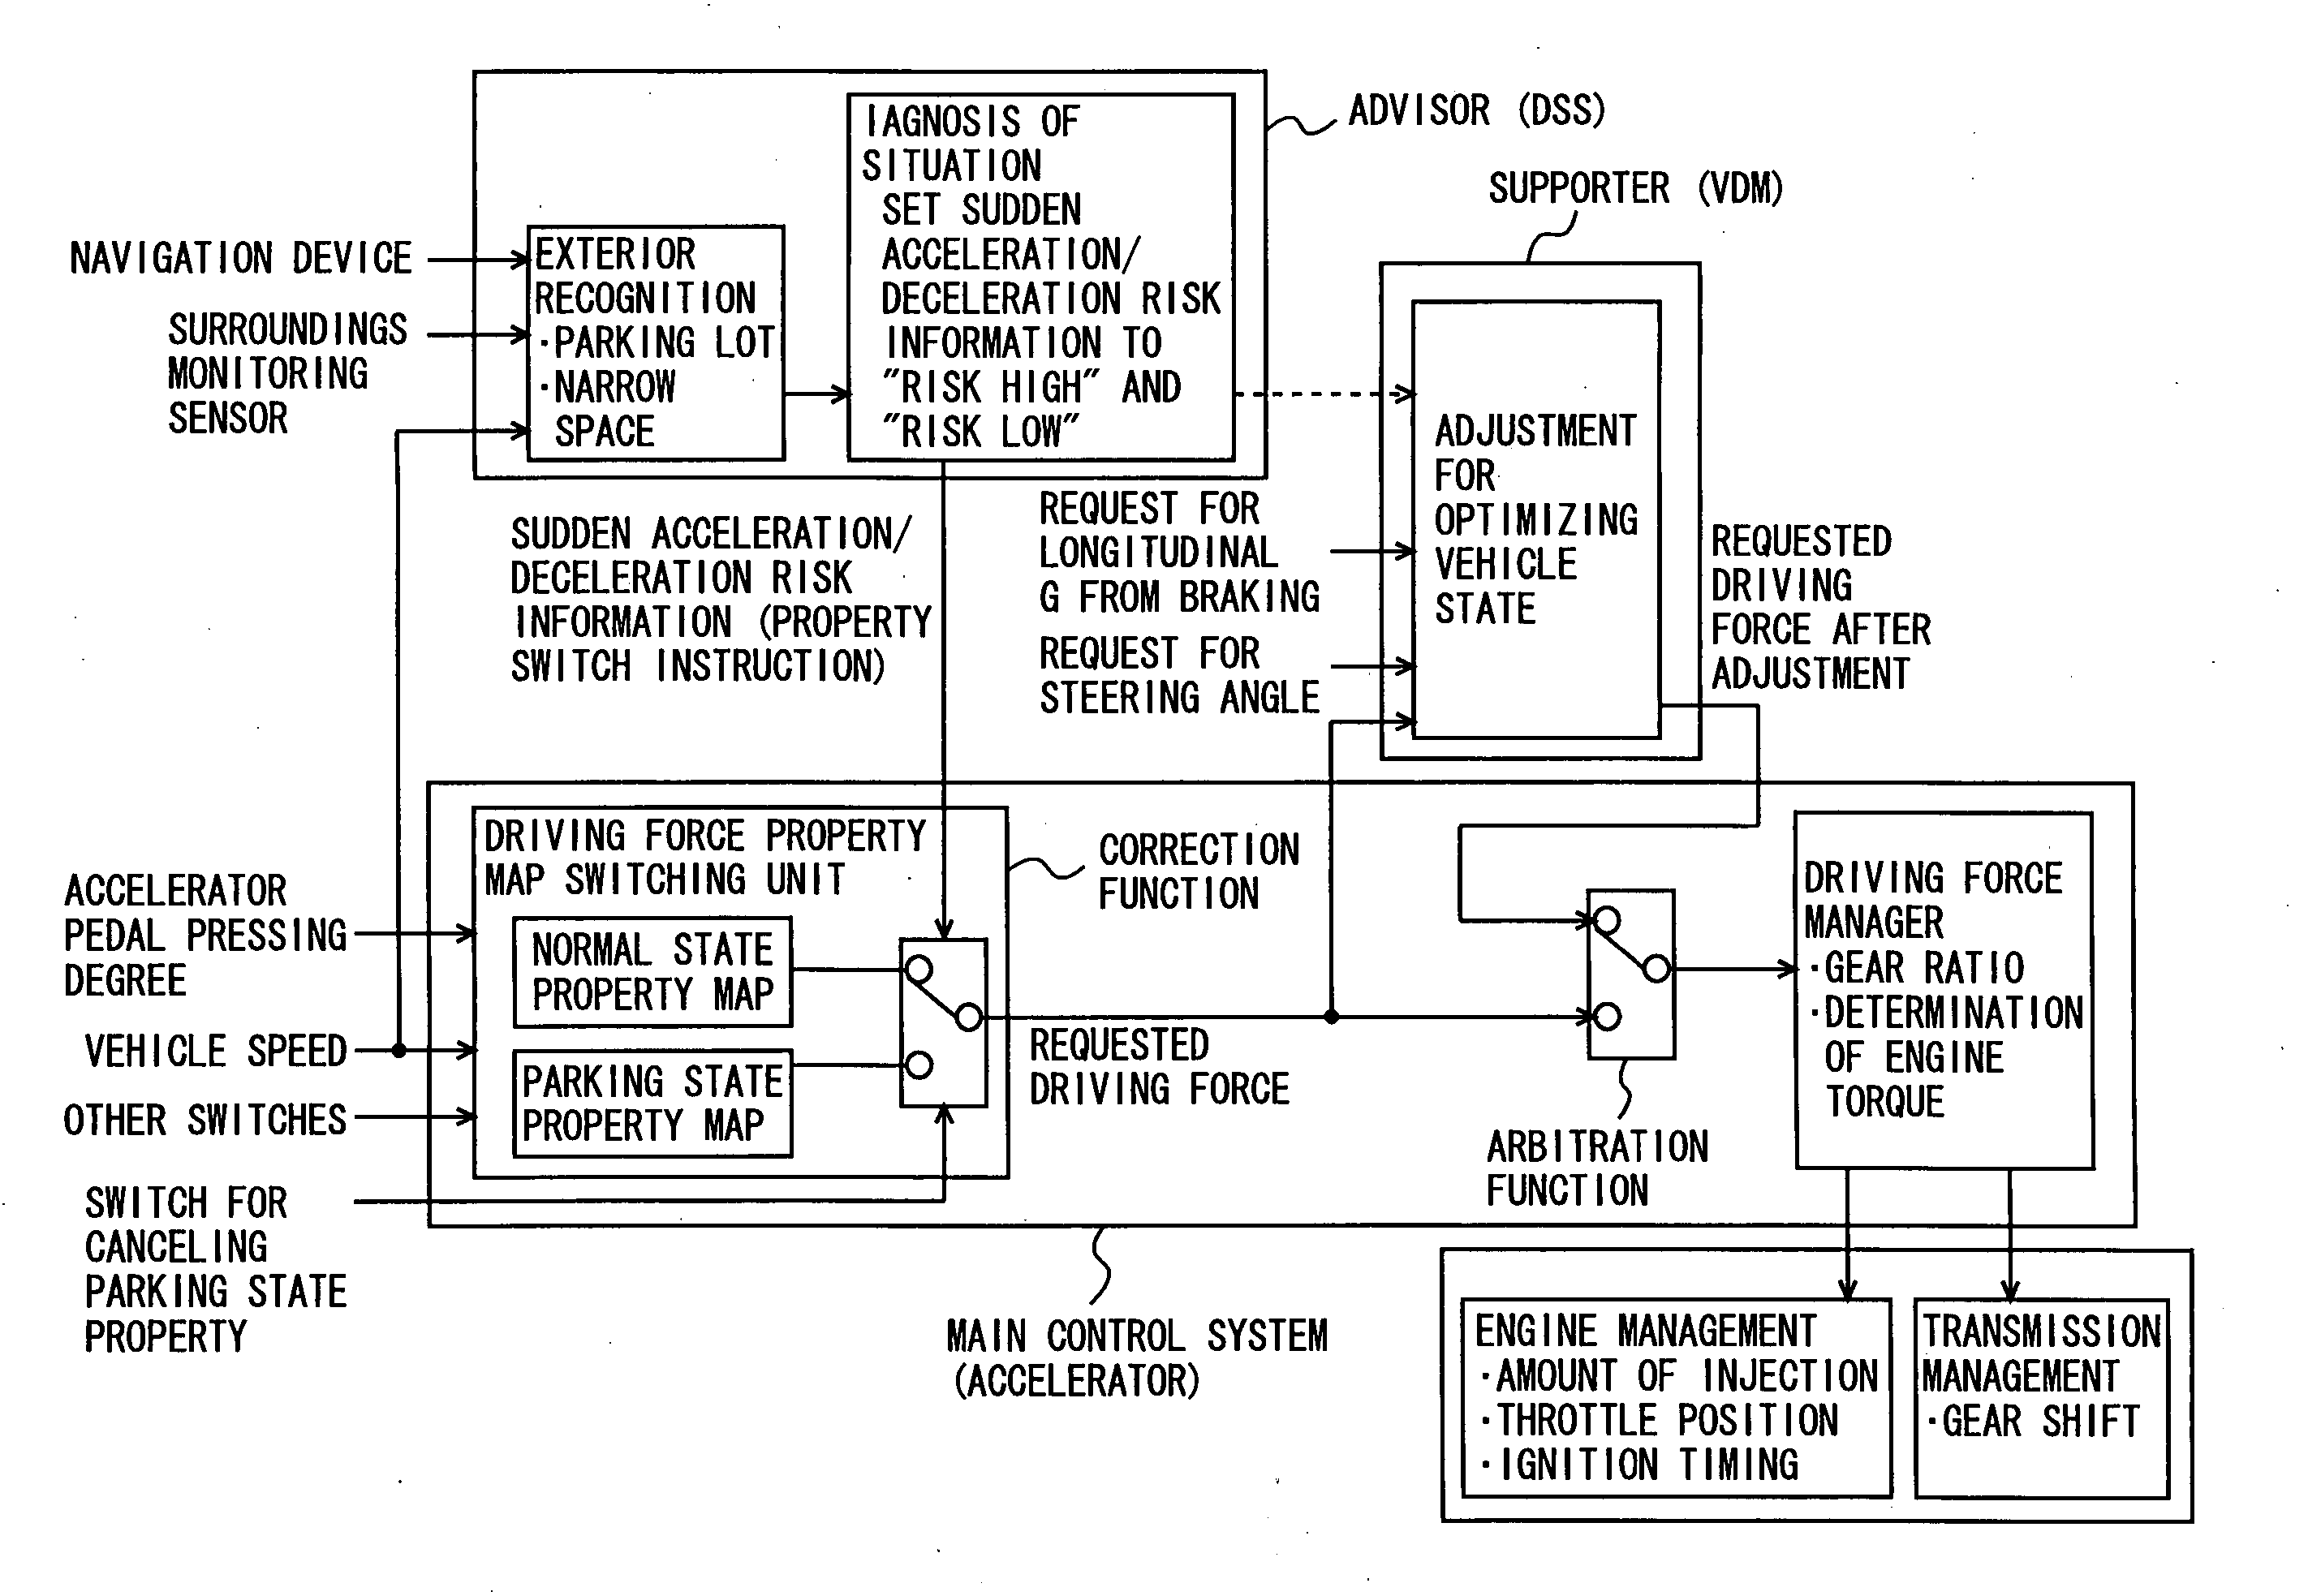 Vehicle integrated control system